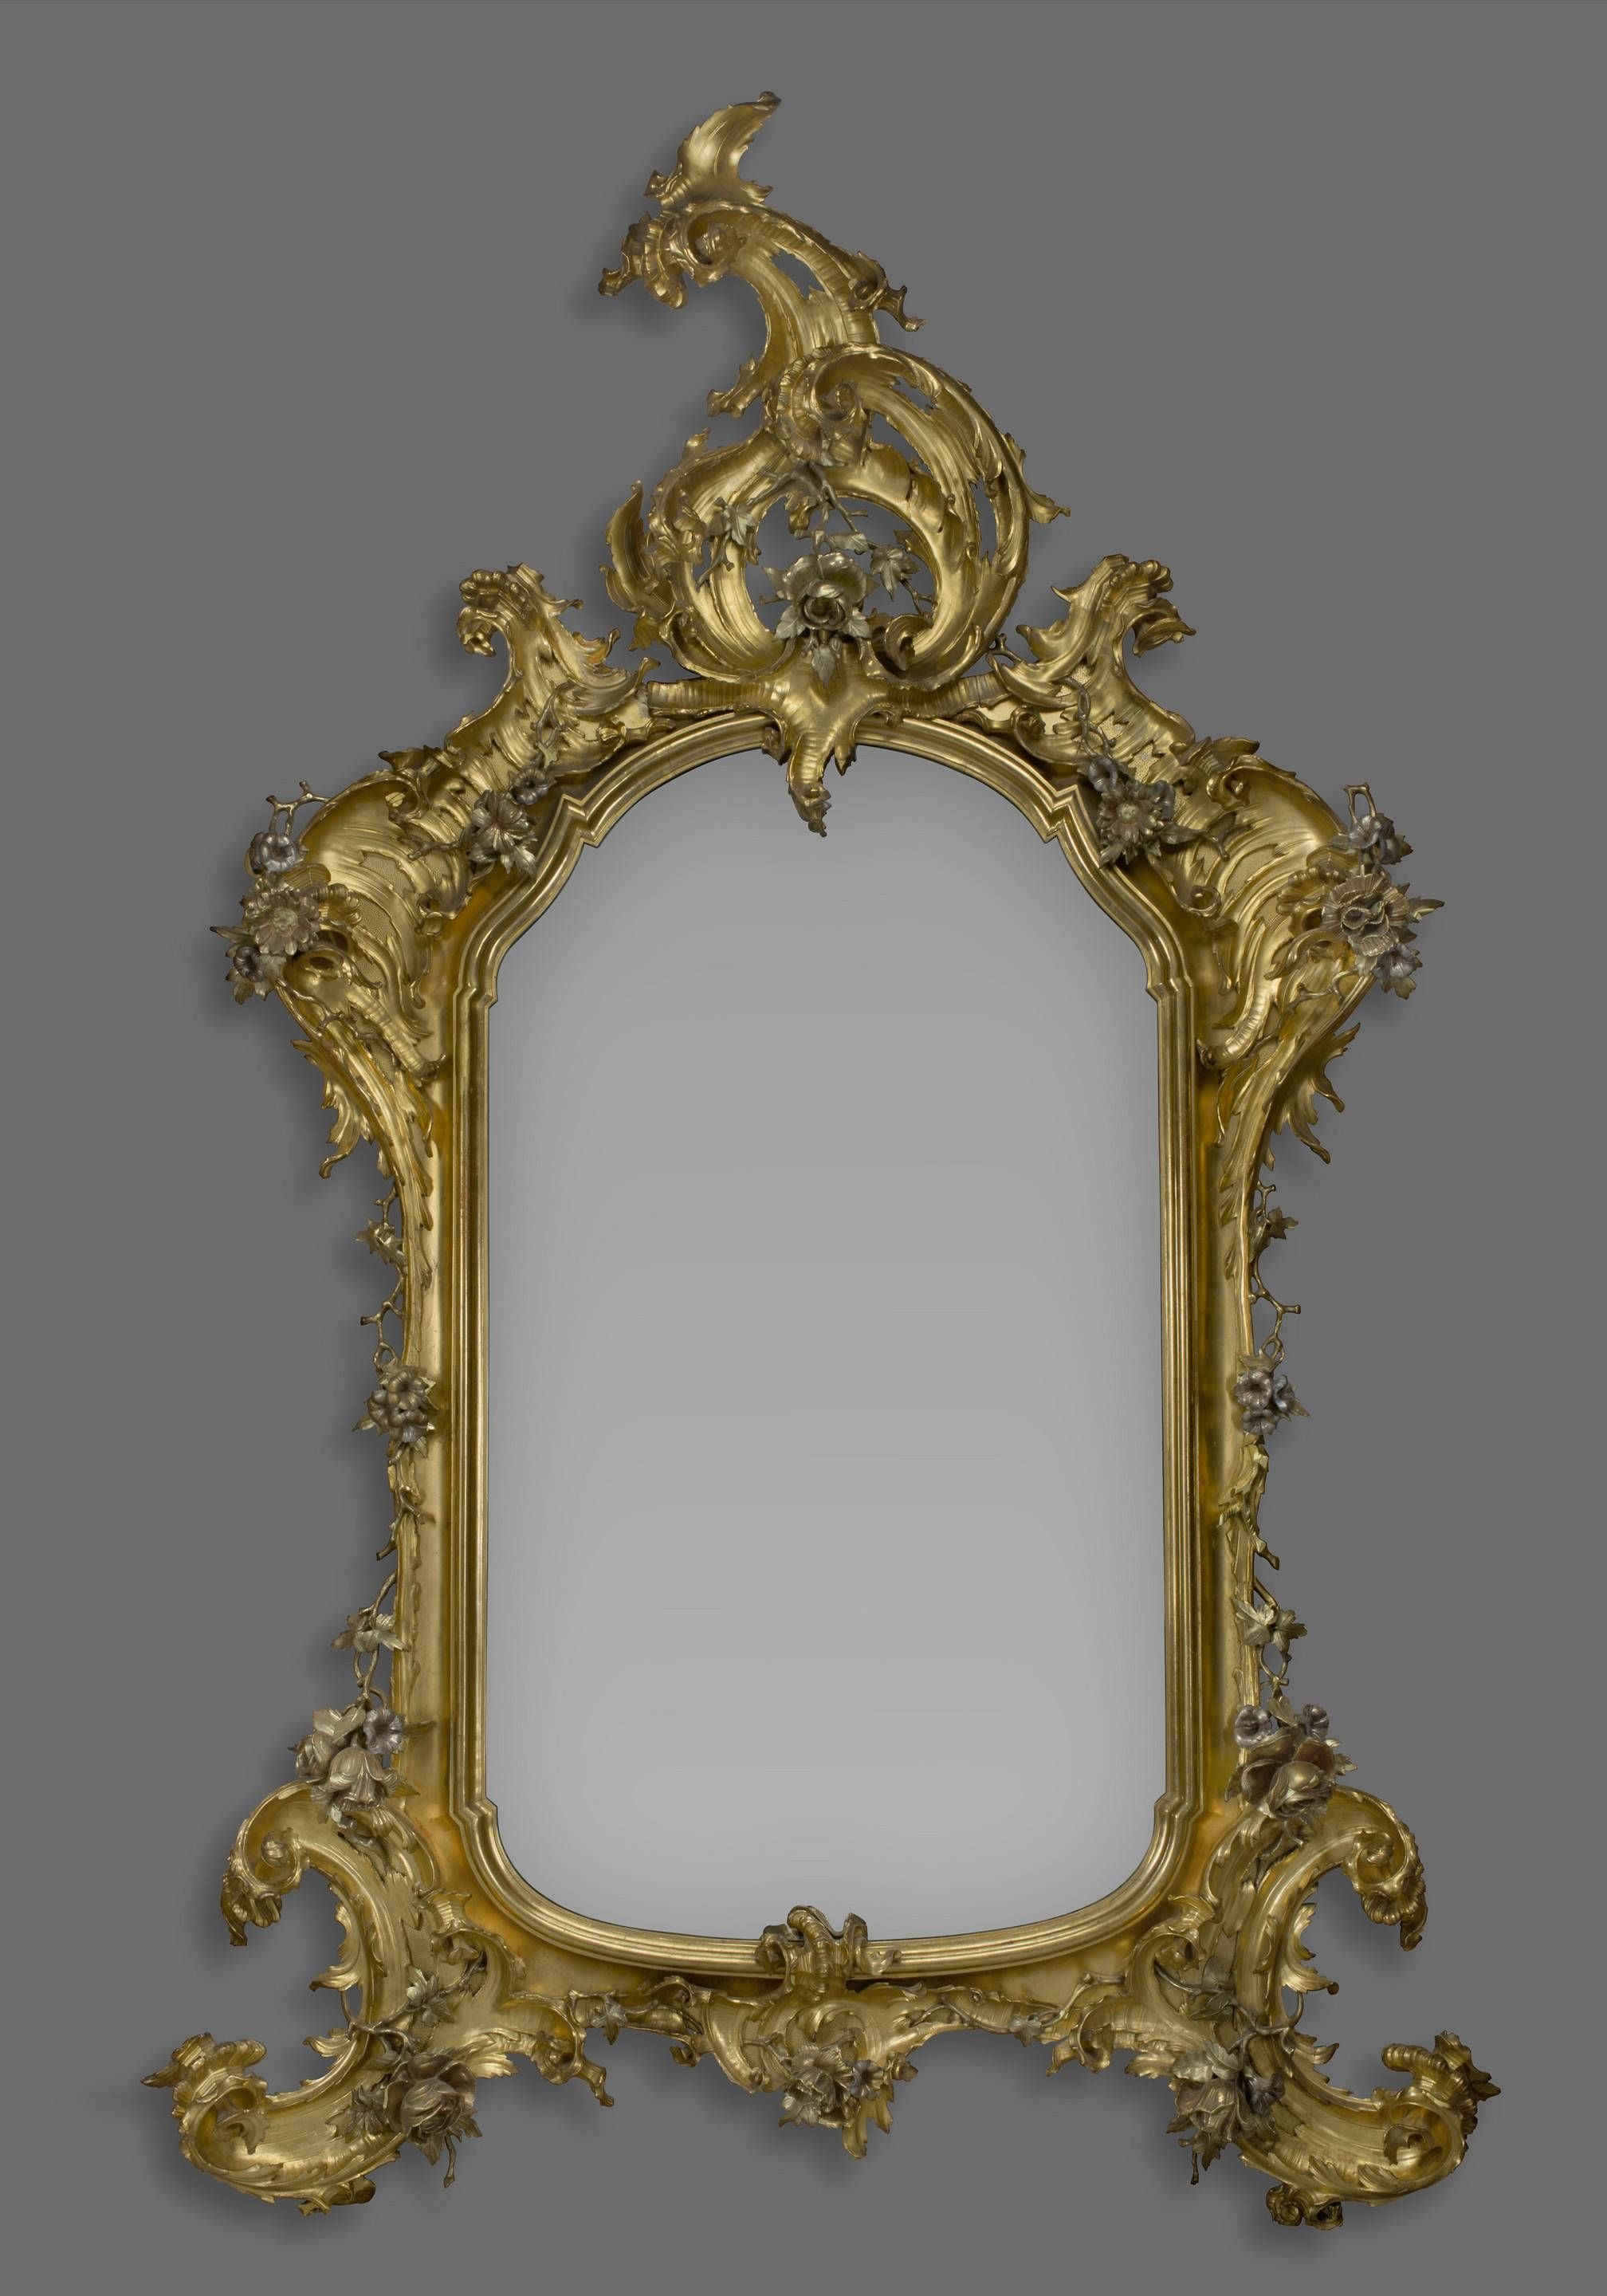 A Large Rococo Style Carved Giltwood And Silver Gilt Mirror (c Throughout Large Gilt Mirrors (View 21 of 25)